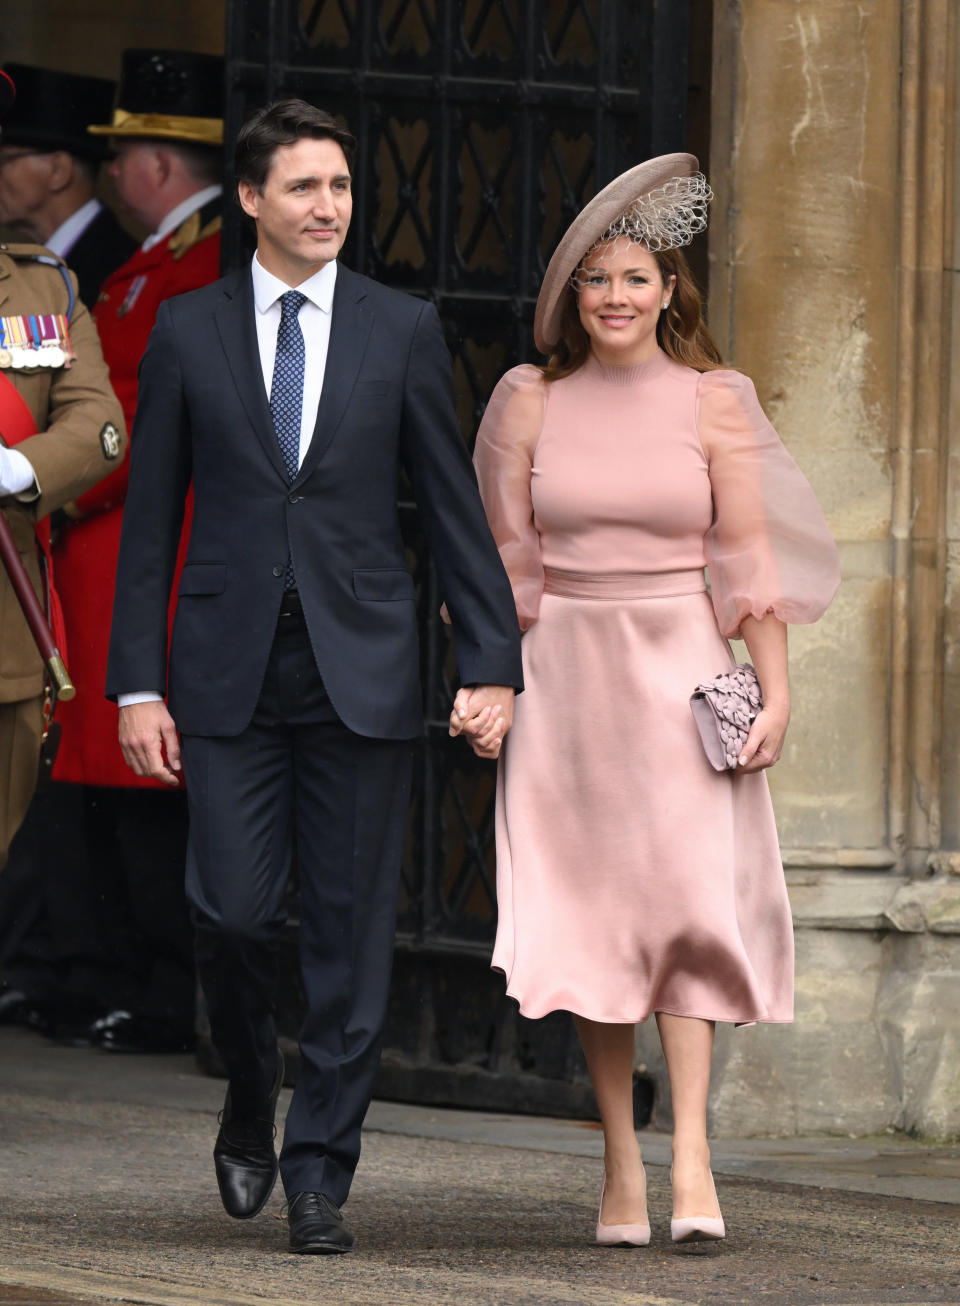 LONDON, ENGLAND - MAY 06: Justin Trudeau and Sophie Grégoire Trudeau arrive at Westminster Abbey for the Coronation of King Charles III and Queen Camilla on May 06, 2023 in London, England. The Coronation of Charles III and his wife, Camilla, as King and Queen of the United Kingdom of Great Britain and Northern Ireland, and the other Commonwealth realms takes place at Westminster Abbey today. Charles acceded to the throne on 8 September 2022, upon the death of his mother, Elizabeth II. (Photo by Karwai Tang/WireImage)